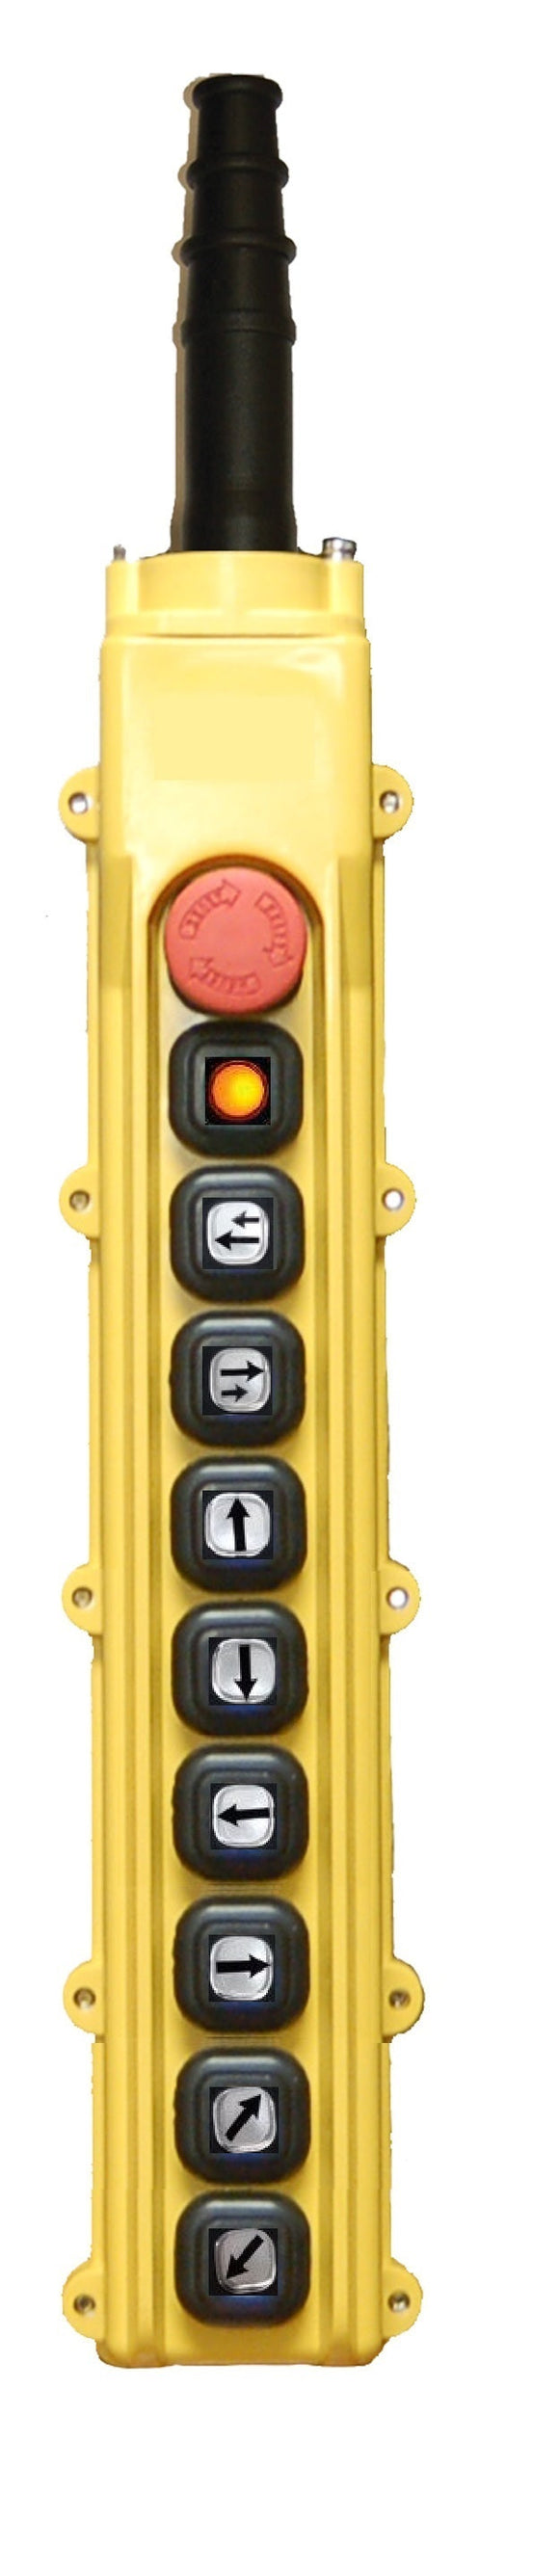 B-85-BE1: 10 Button Pendant Station. EMS / Indicator / 6 x 1 Speed and 2 x 2 Speed Contacts